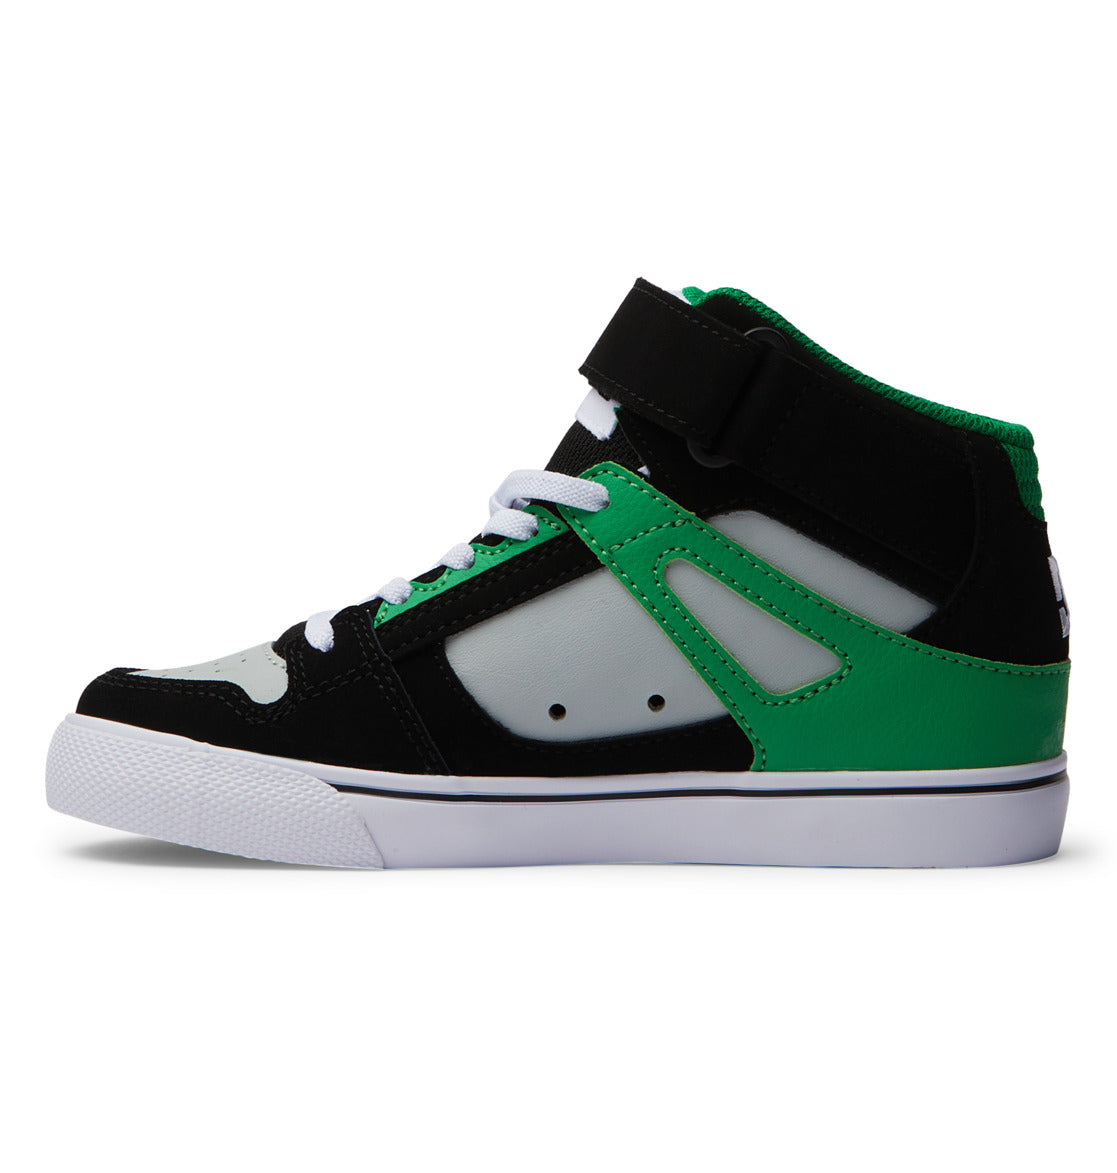 Kids' Pure High Elastic Lace High-Top Shoes - Black/Kelly Green